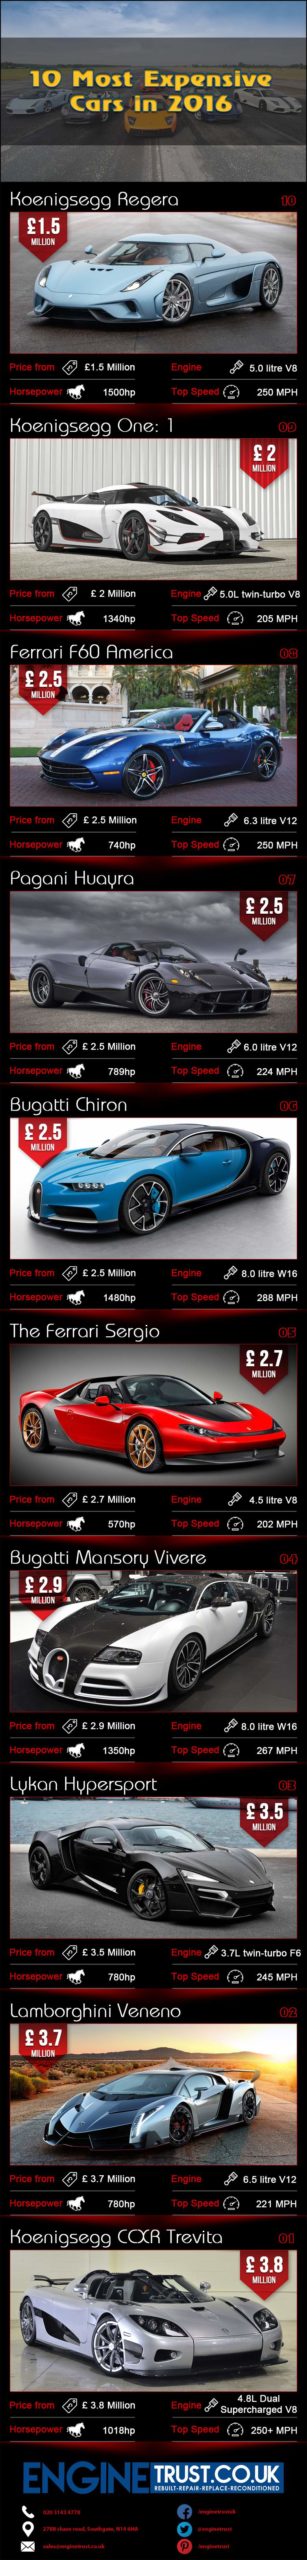 10-Most-Expensive-Cars-in-2016